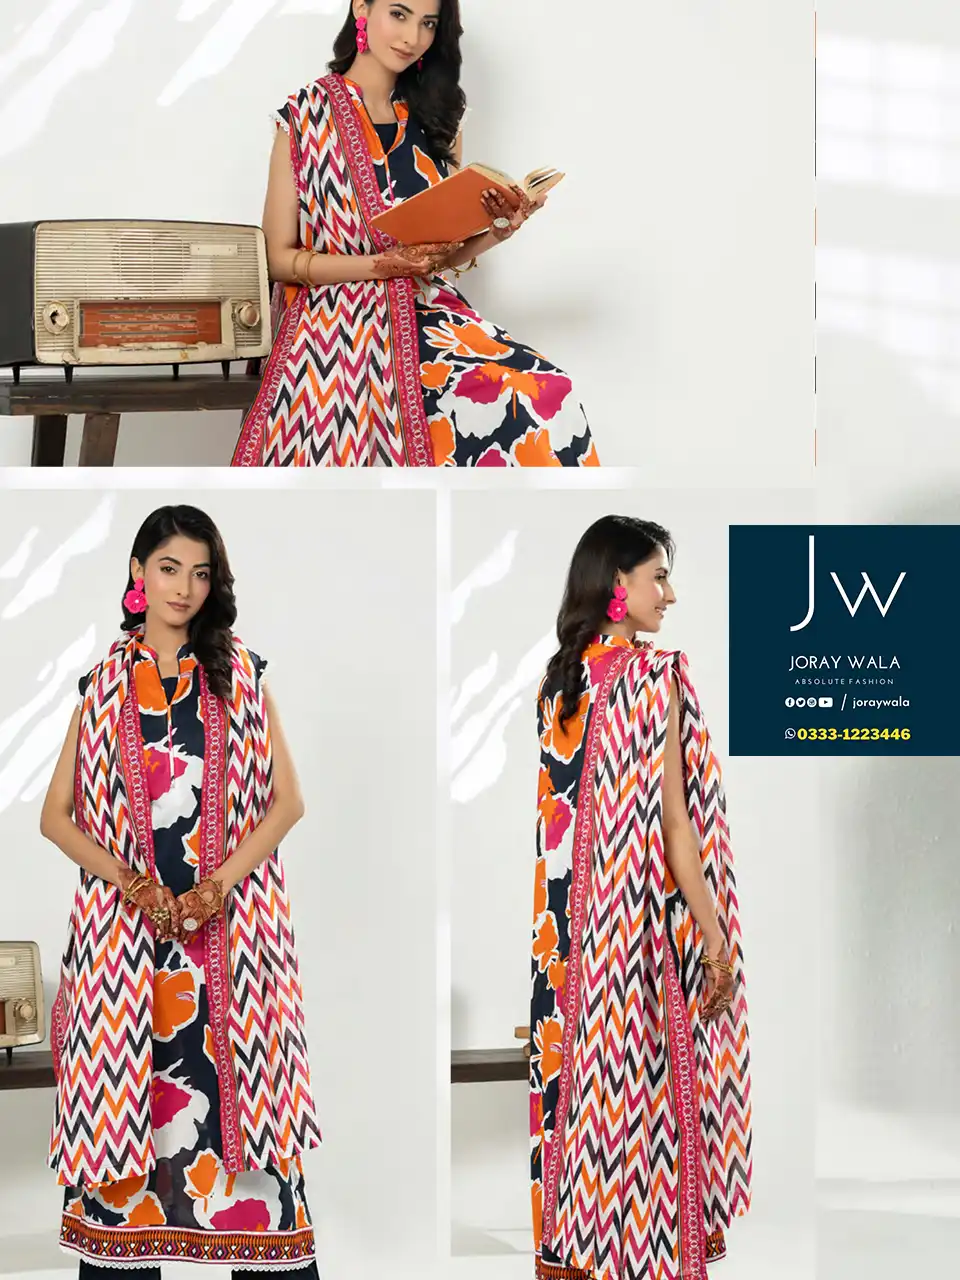 ZESH Printed Pop Series D2 available at joraywala with free delivery